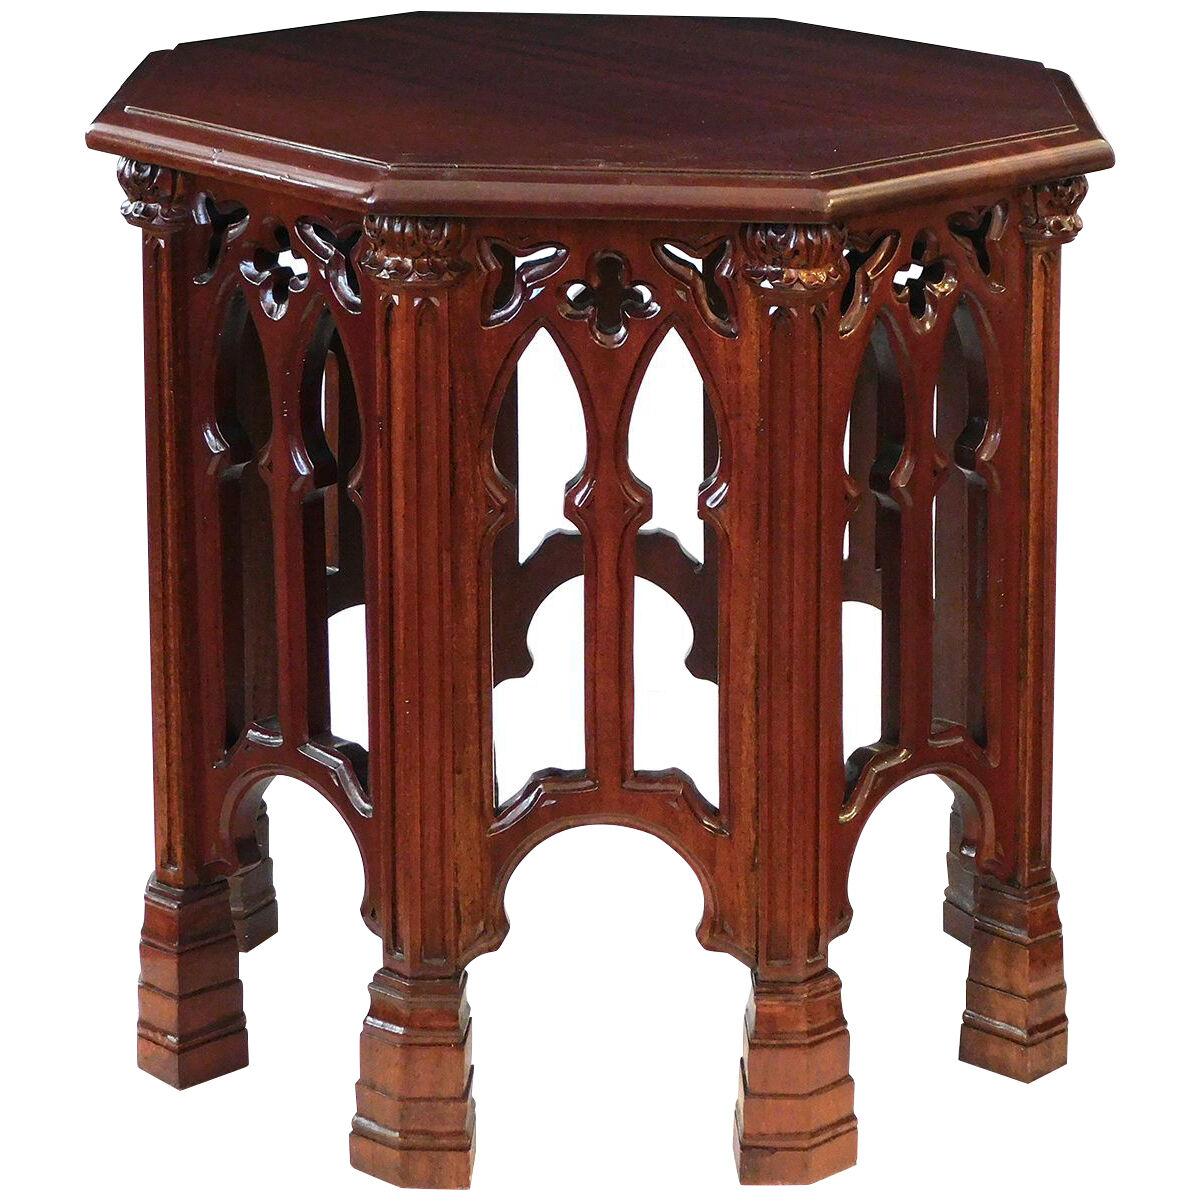 English neo-gothic style carved solid mahogany octagonal side/drinks table